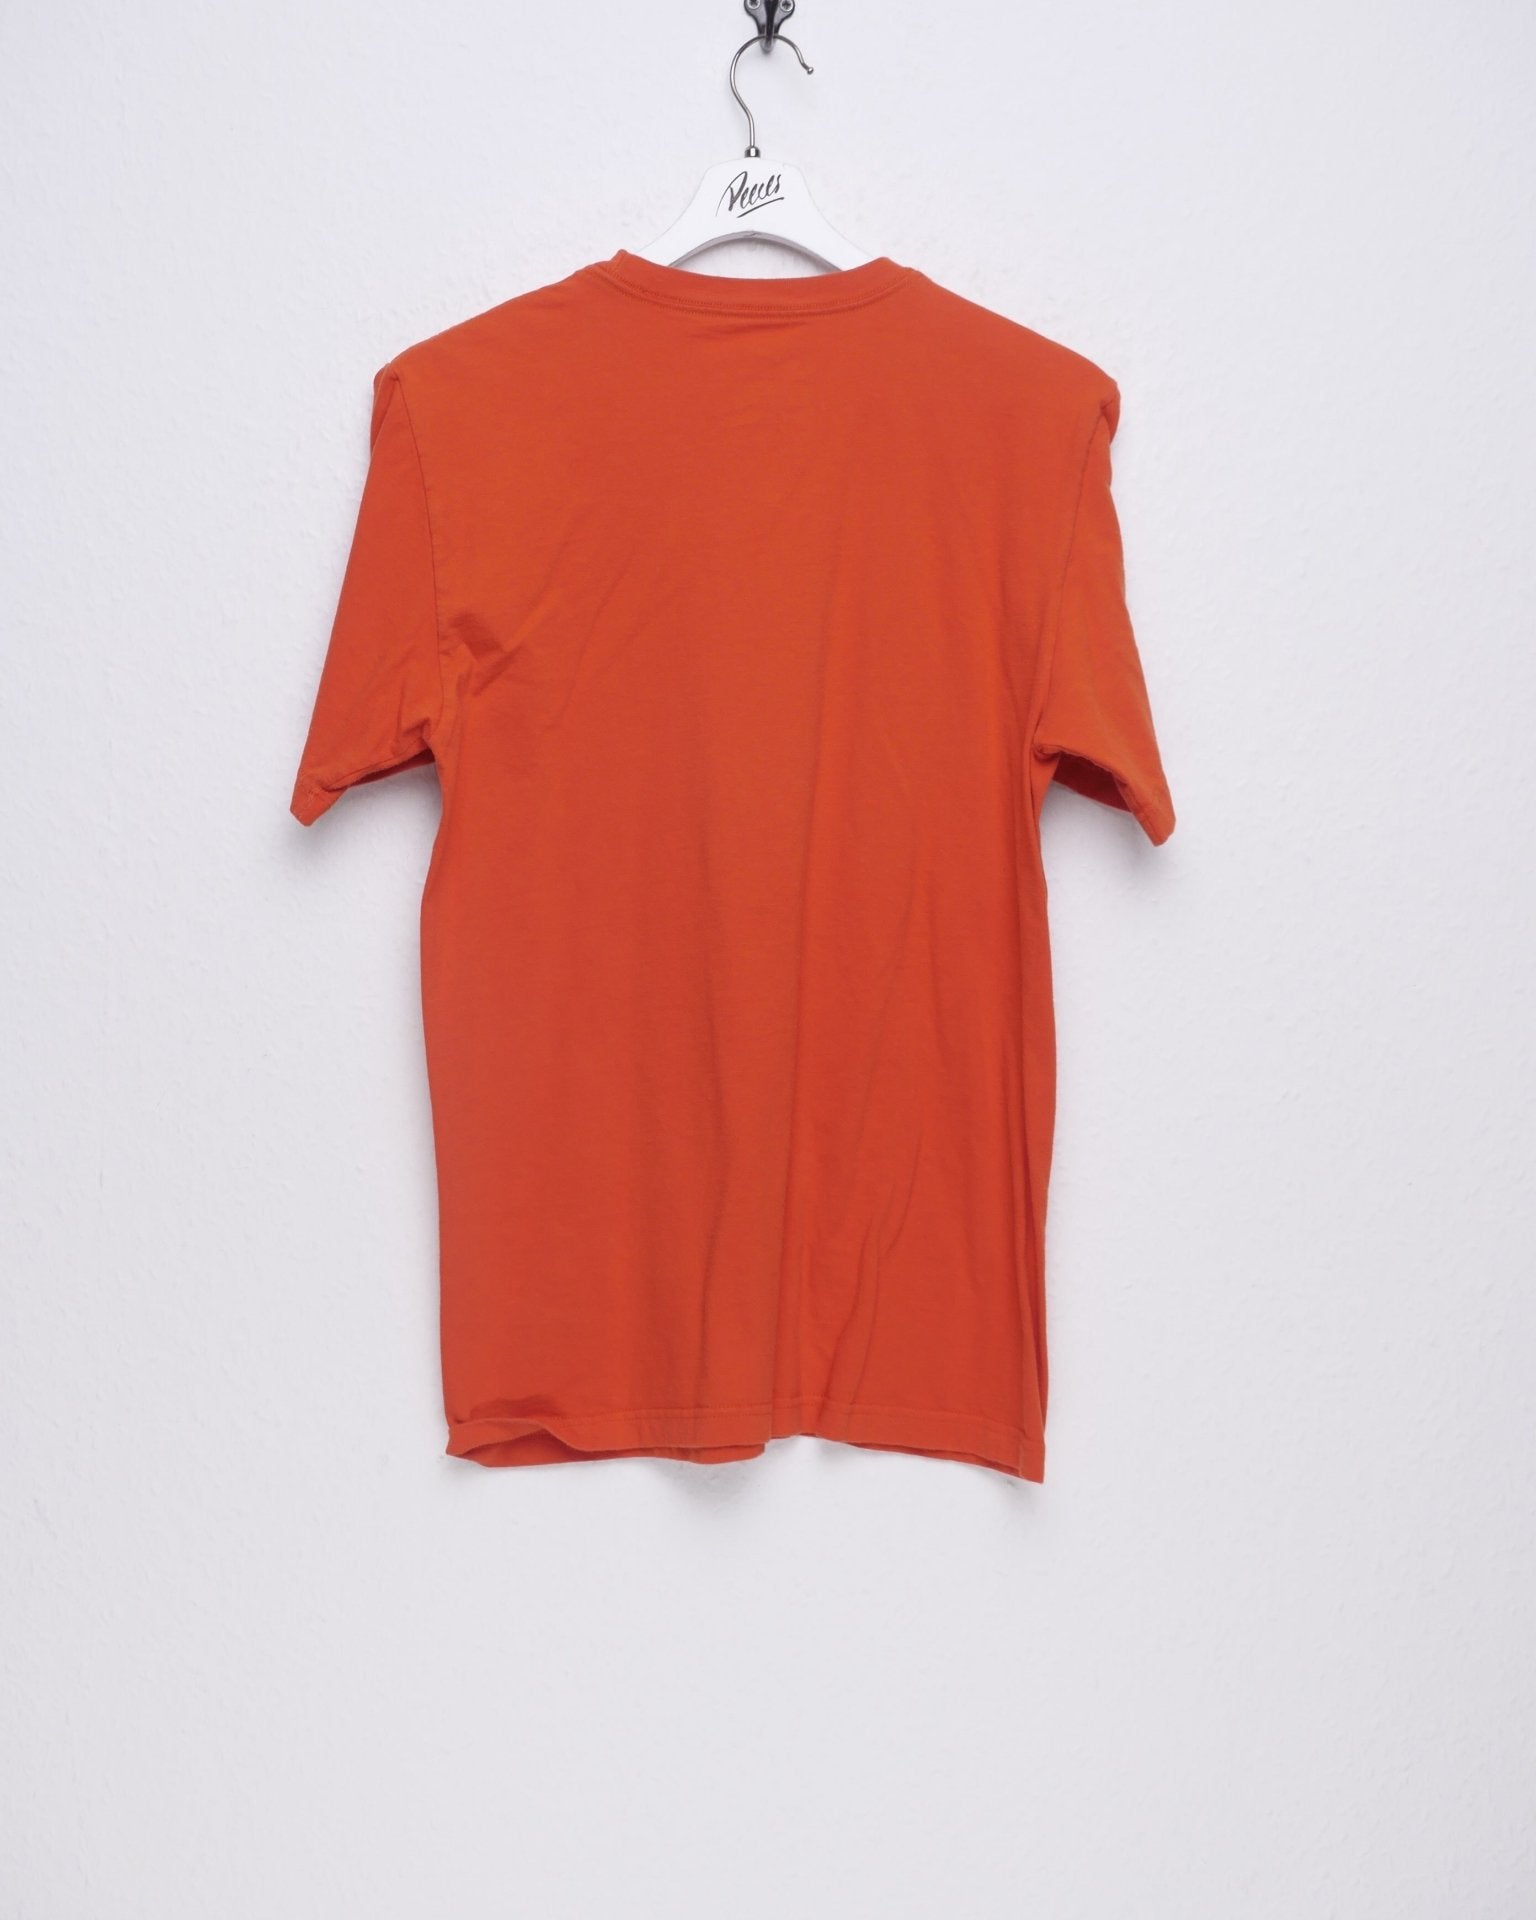 Nike printed 'just dunk it' Spellout washed orange Shirt - Peeces